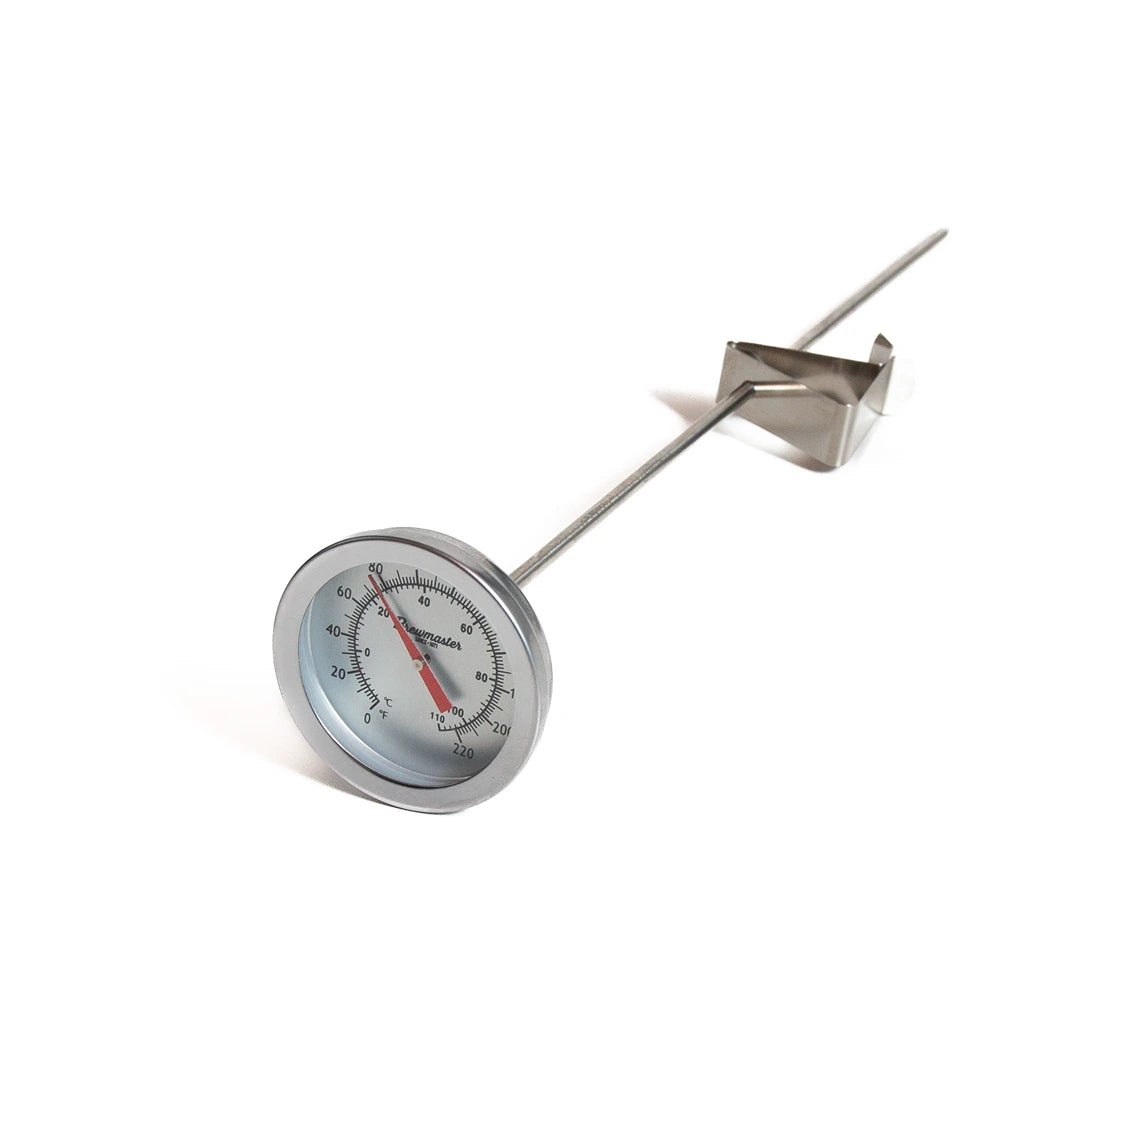  1Pc Kettle Clip on Dial Thermometer Home Brew Wine